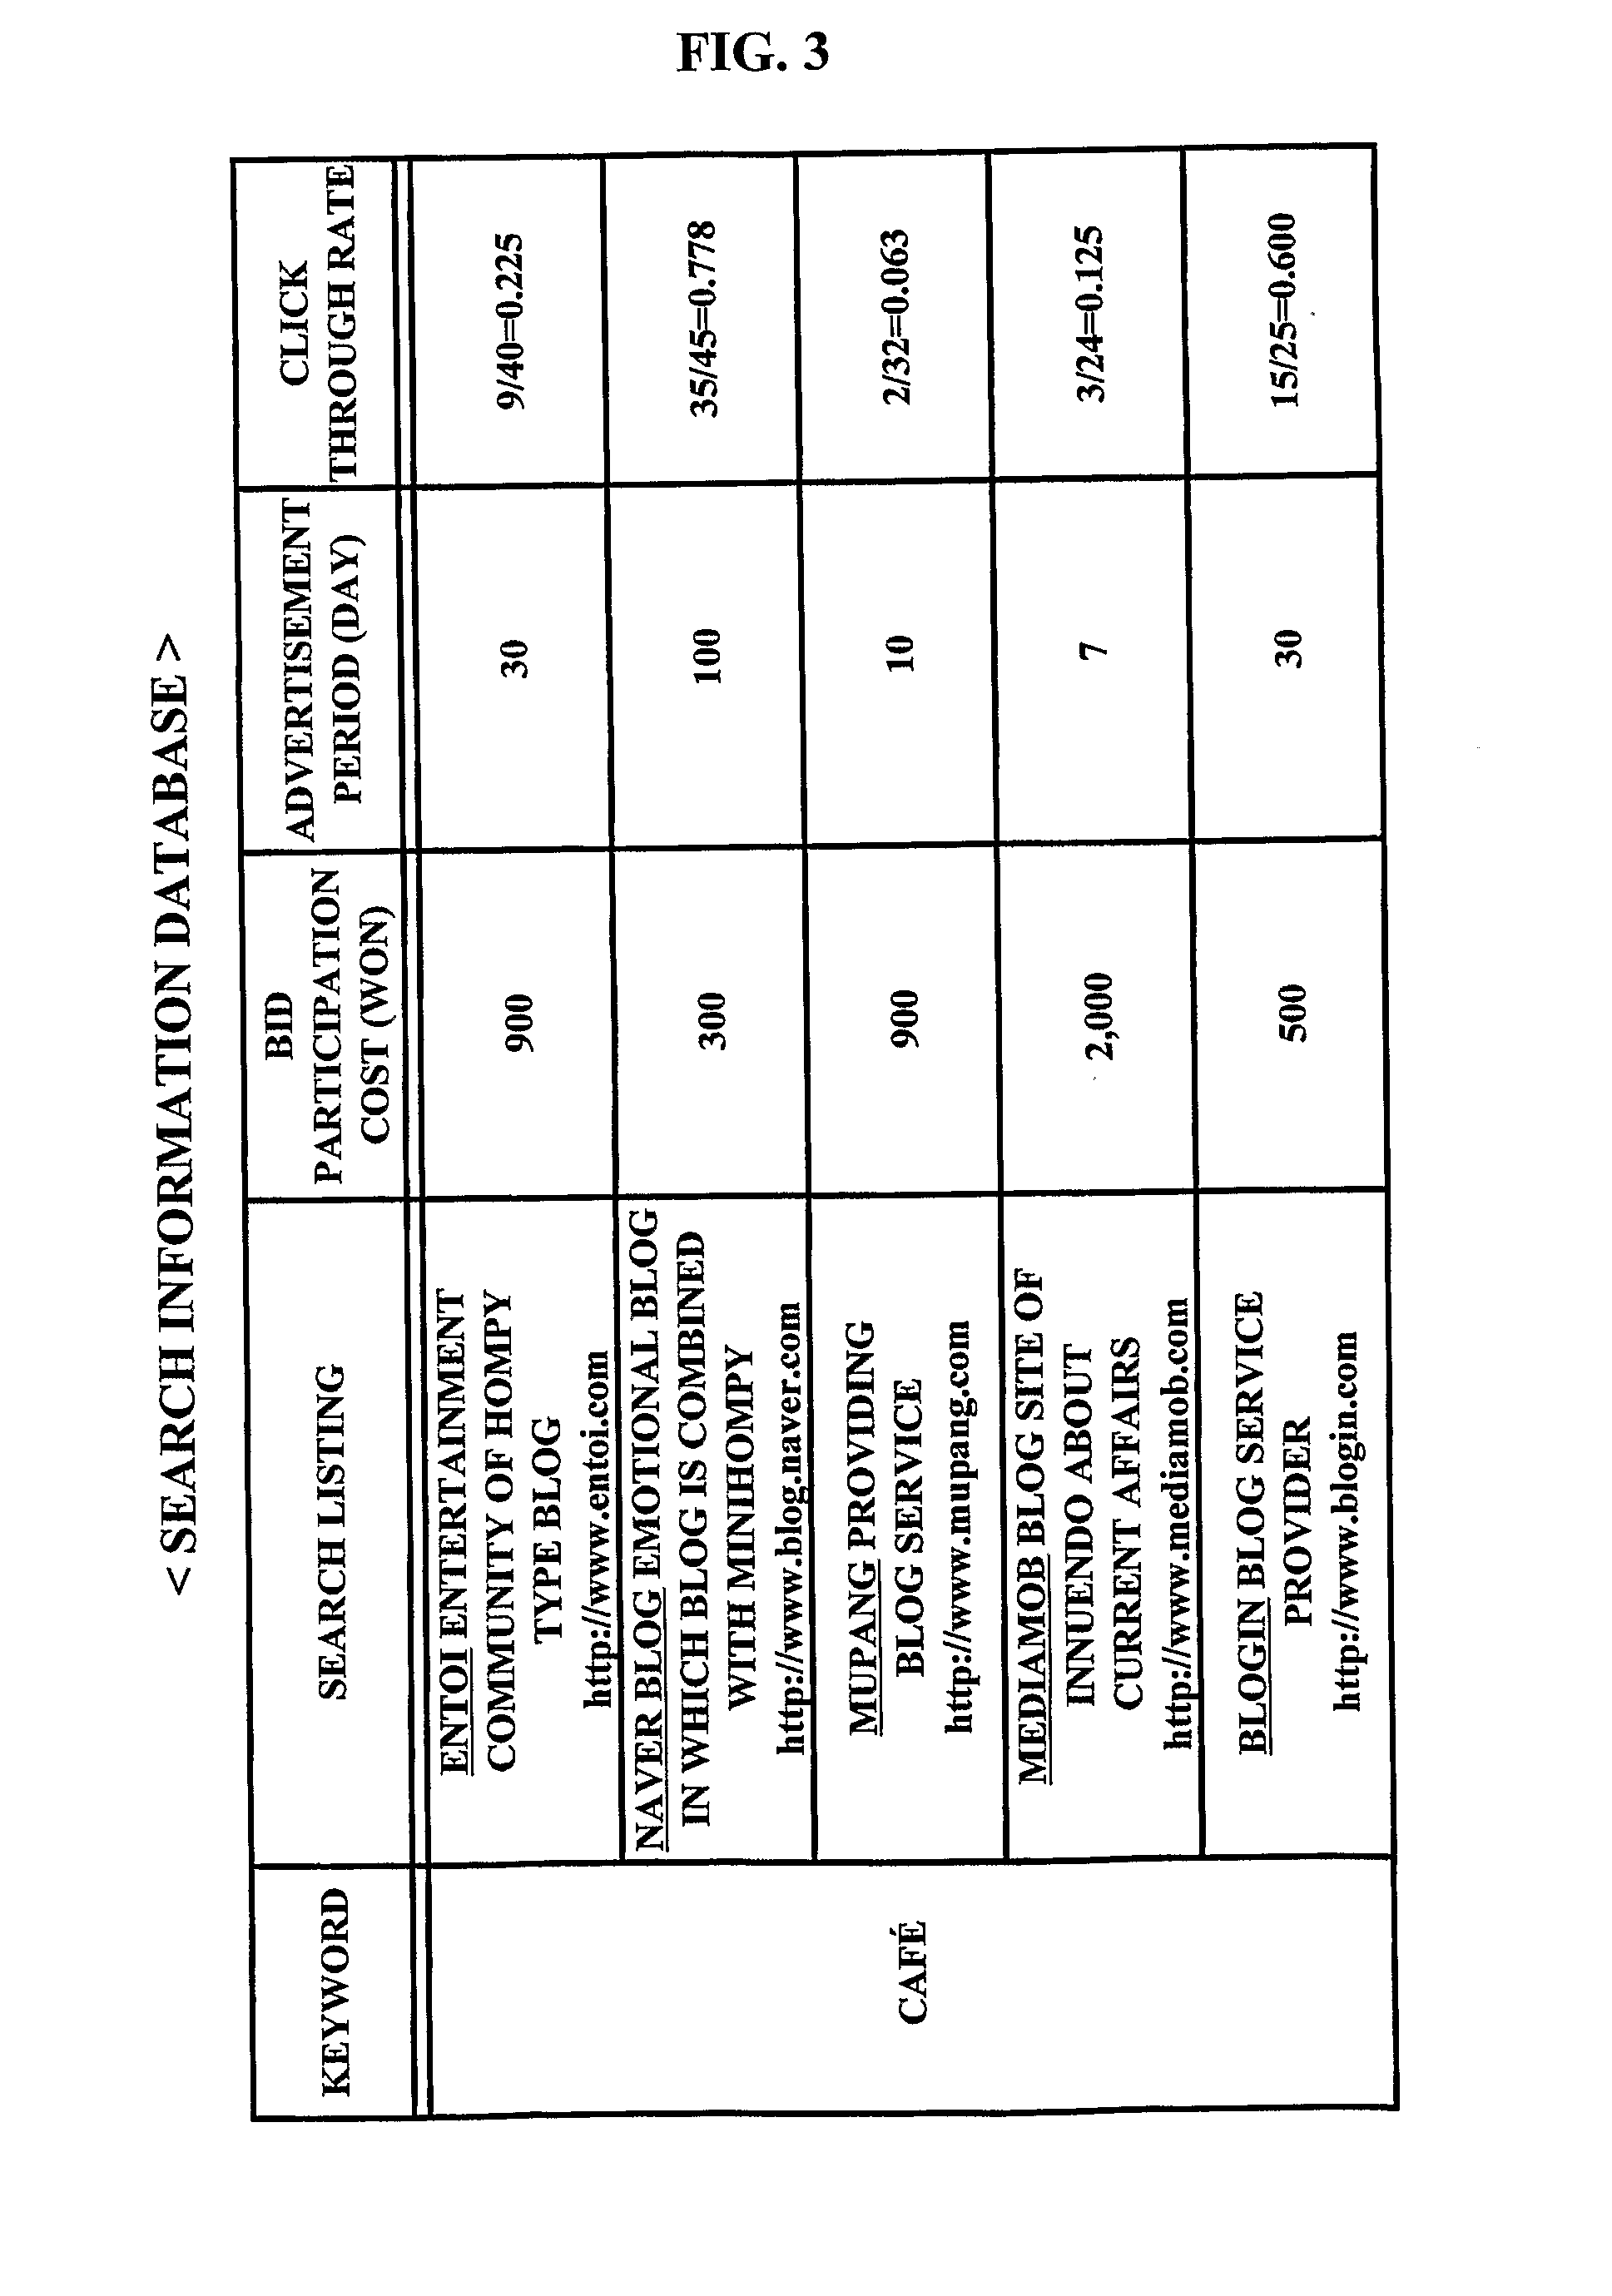 Method and System for Selecting Search List Table in Internet Search Engine in Response to Search Request